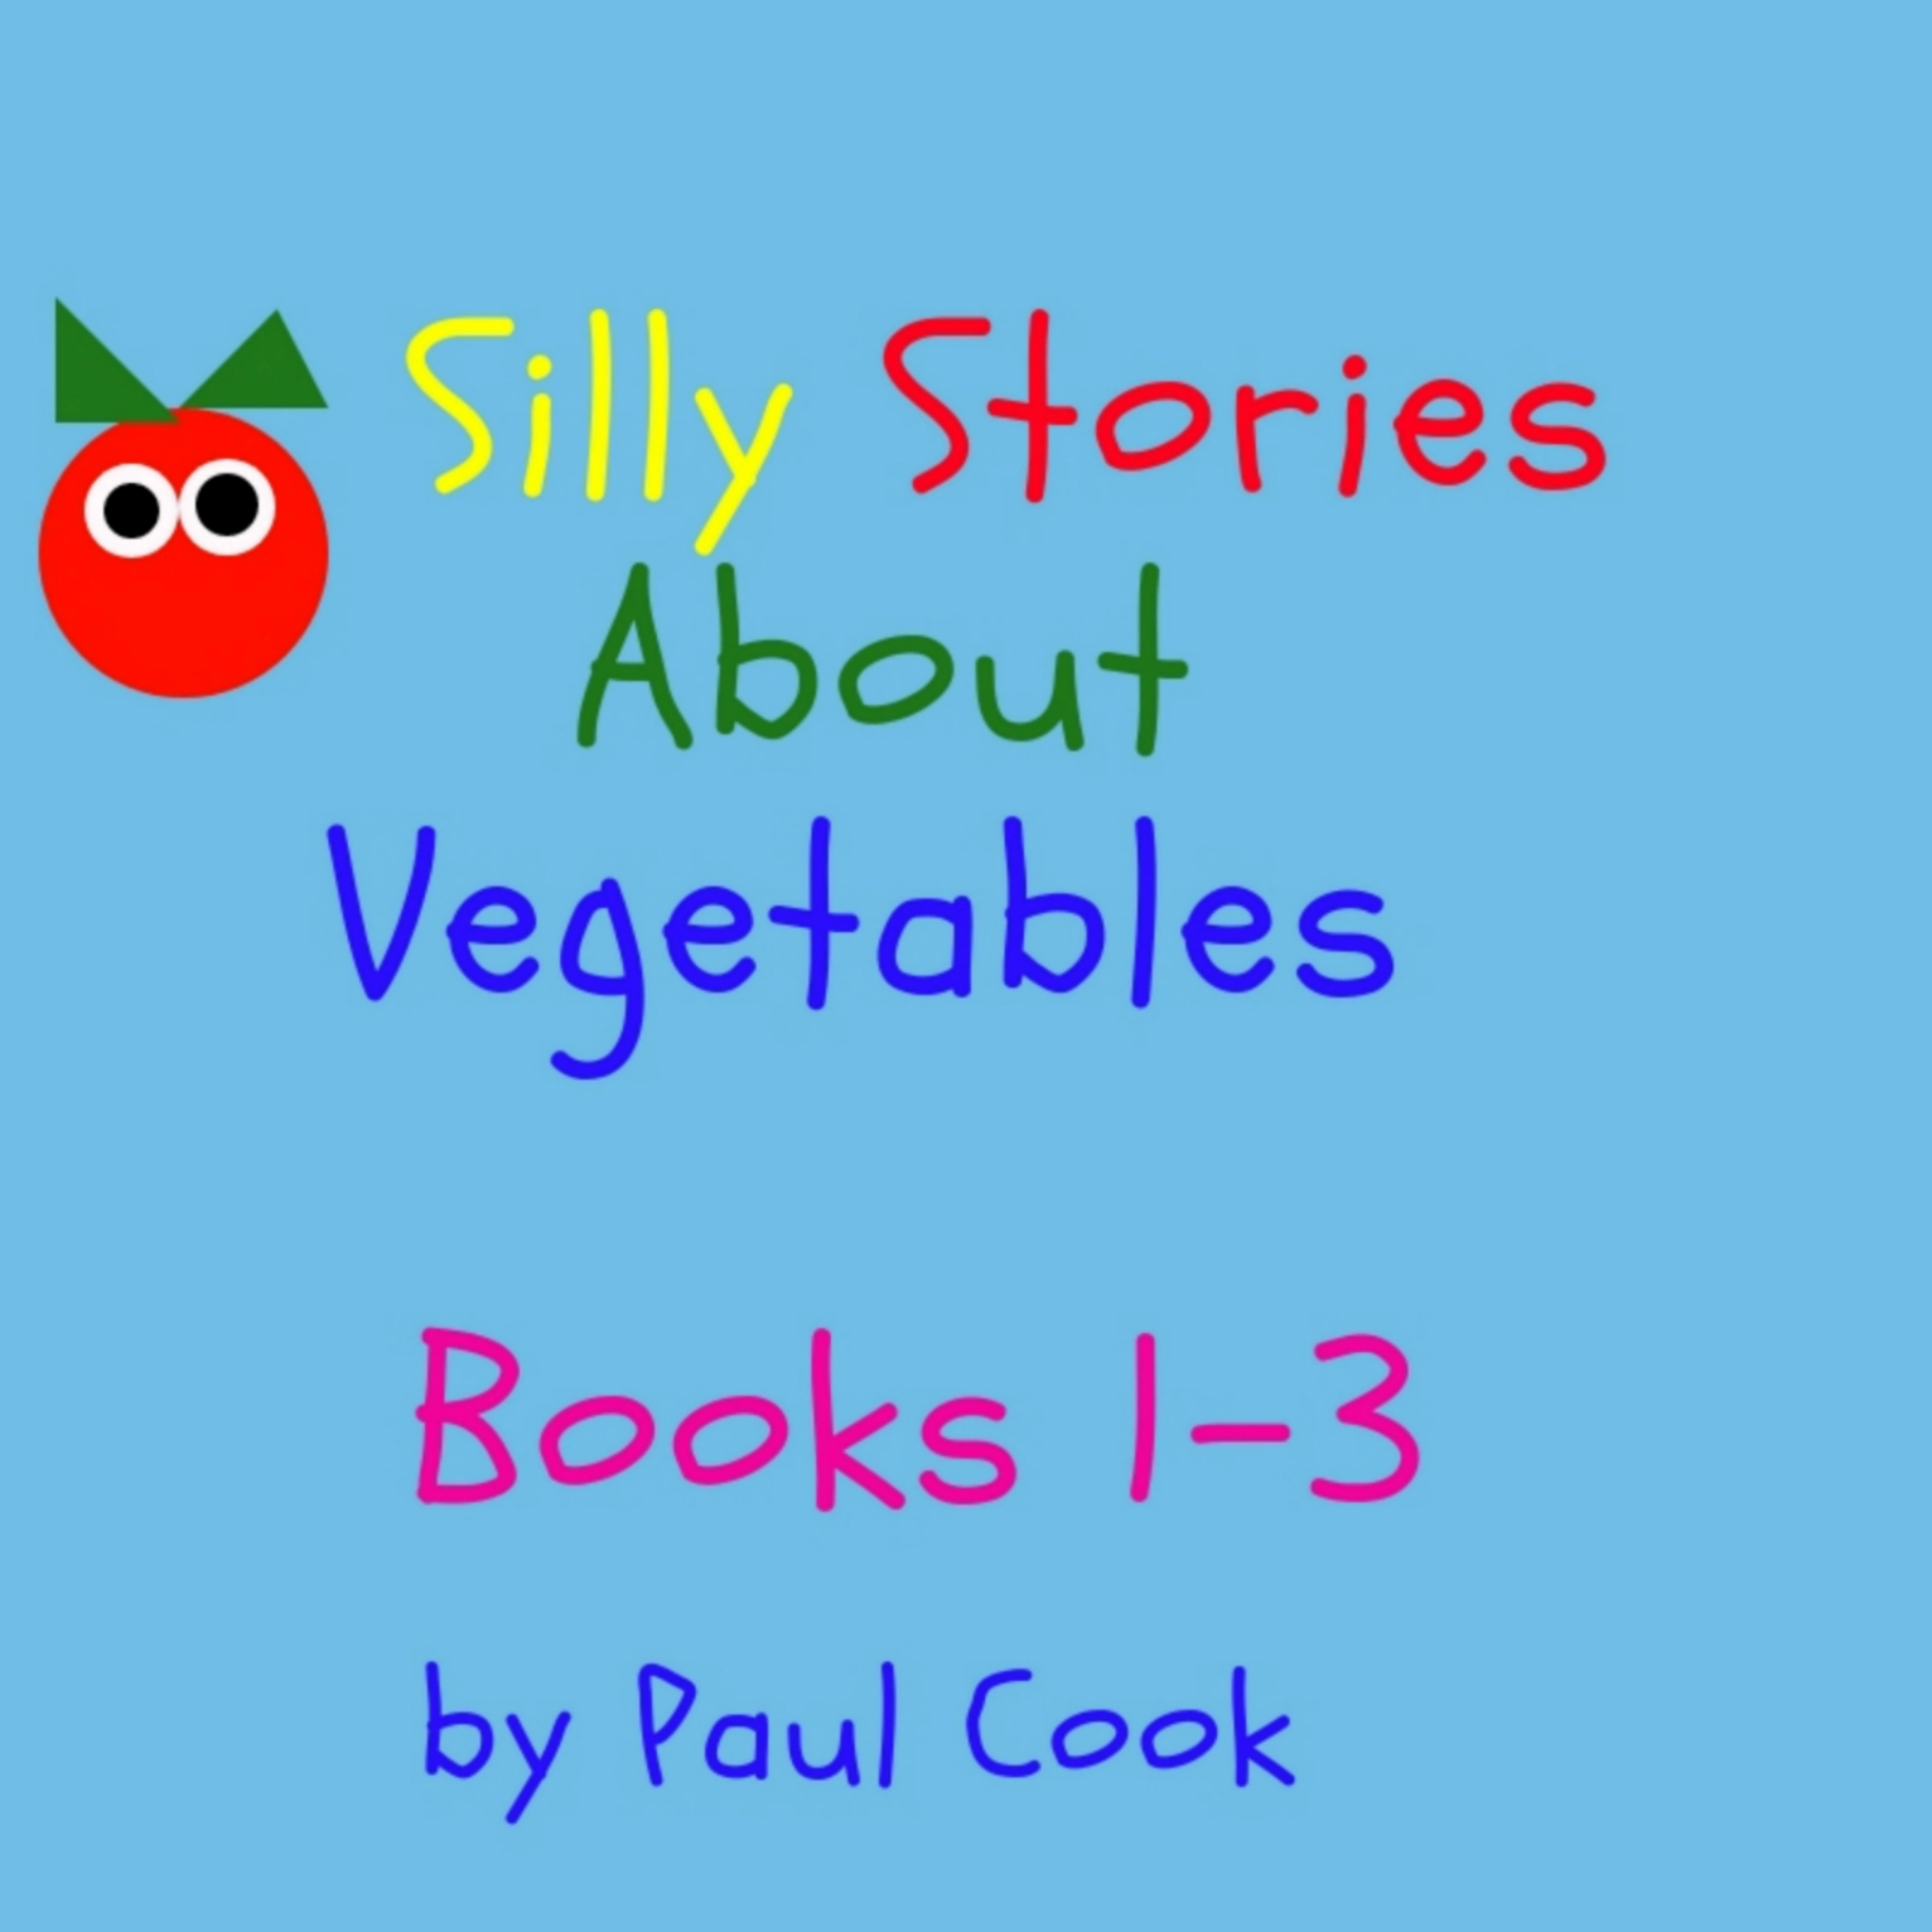 Silly Stories About Vegetables: Books 1-3 Audiobook by Paul Cook